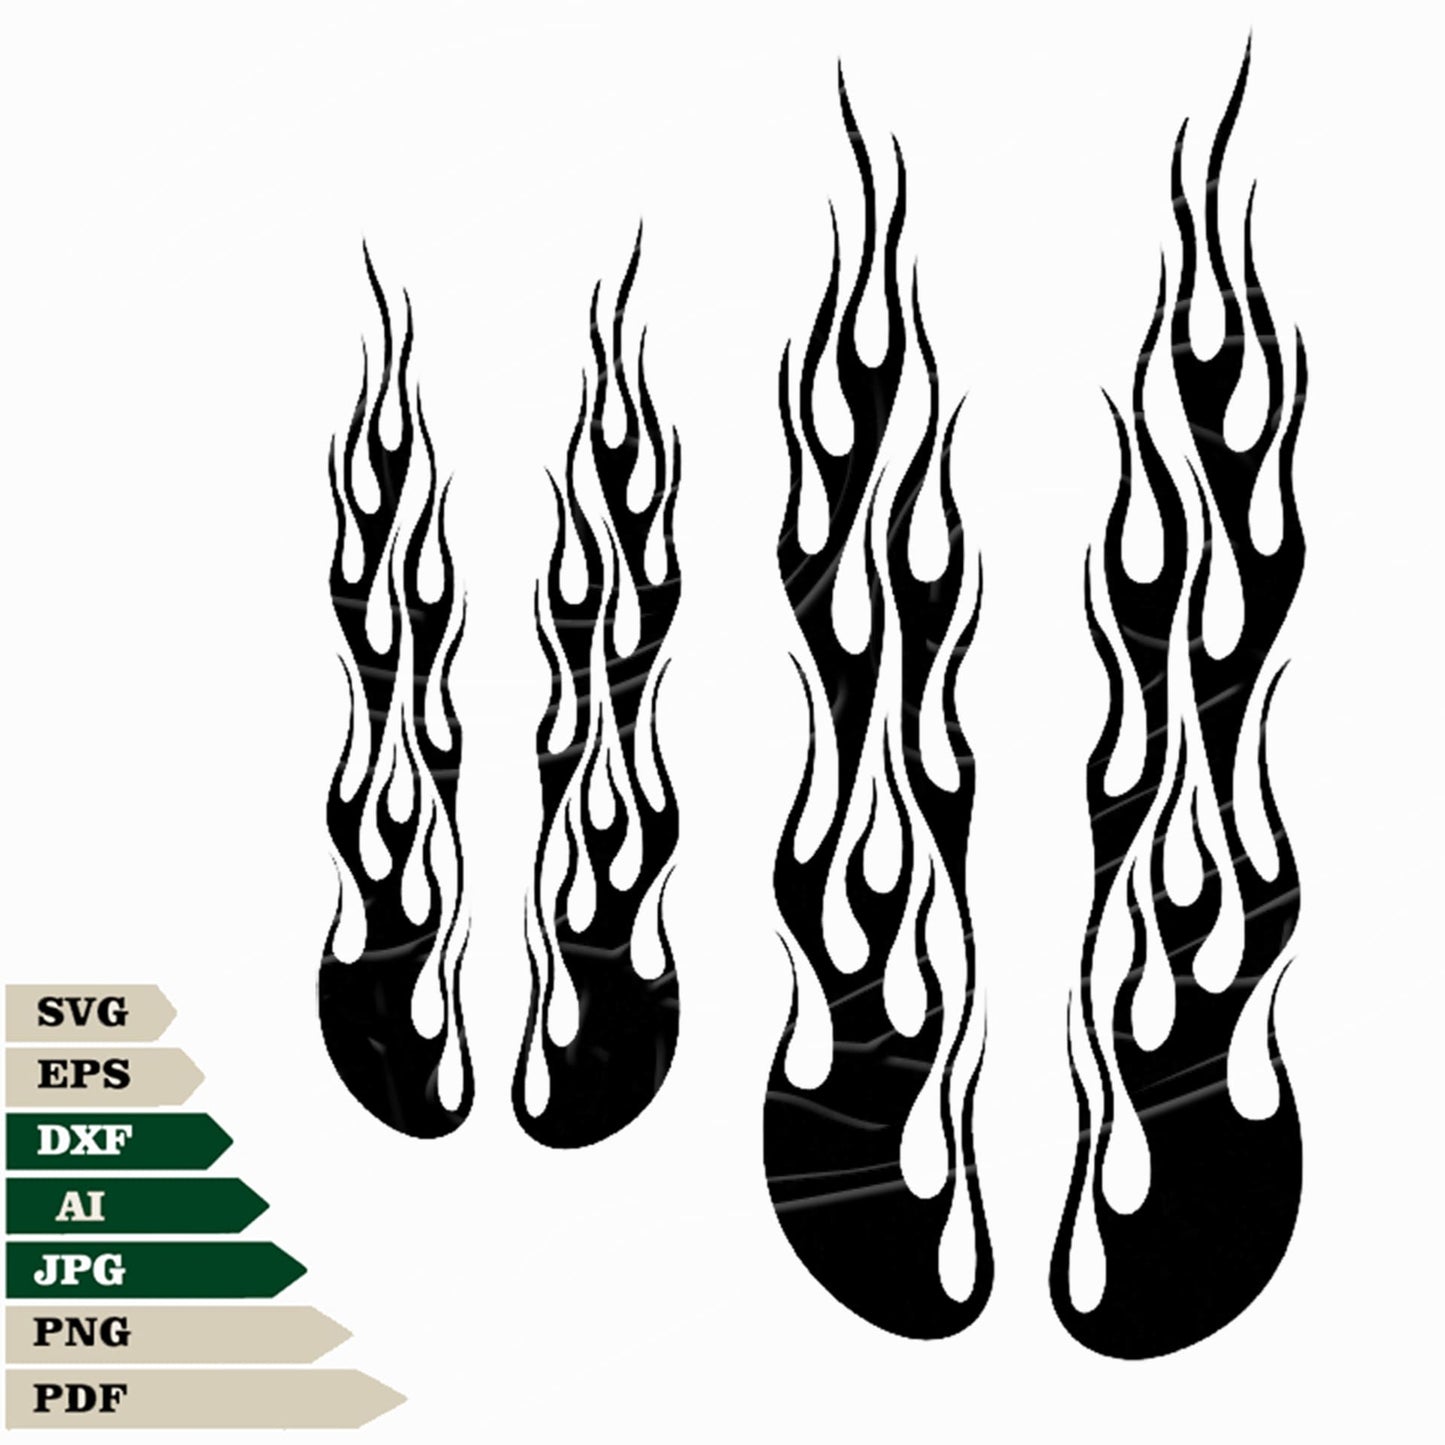 motorcycles svg file, motorcycles harley davidson svg design, harley davidson logo png, motorcycle flame svg file, motorcycle vector graphics, motorcycles harley davidson svg for tattoo, motorcycles svg for cricut